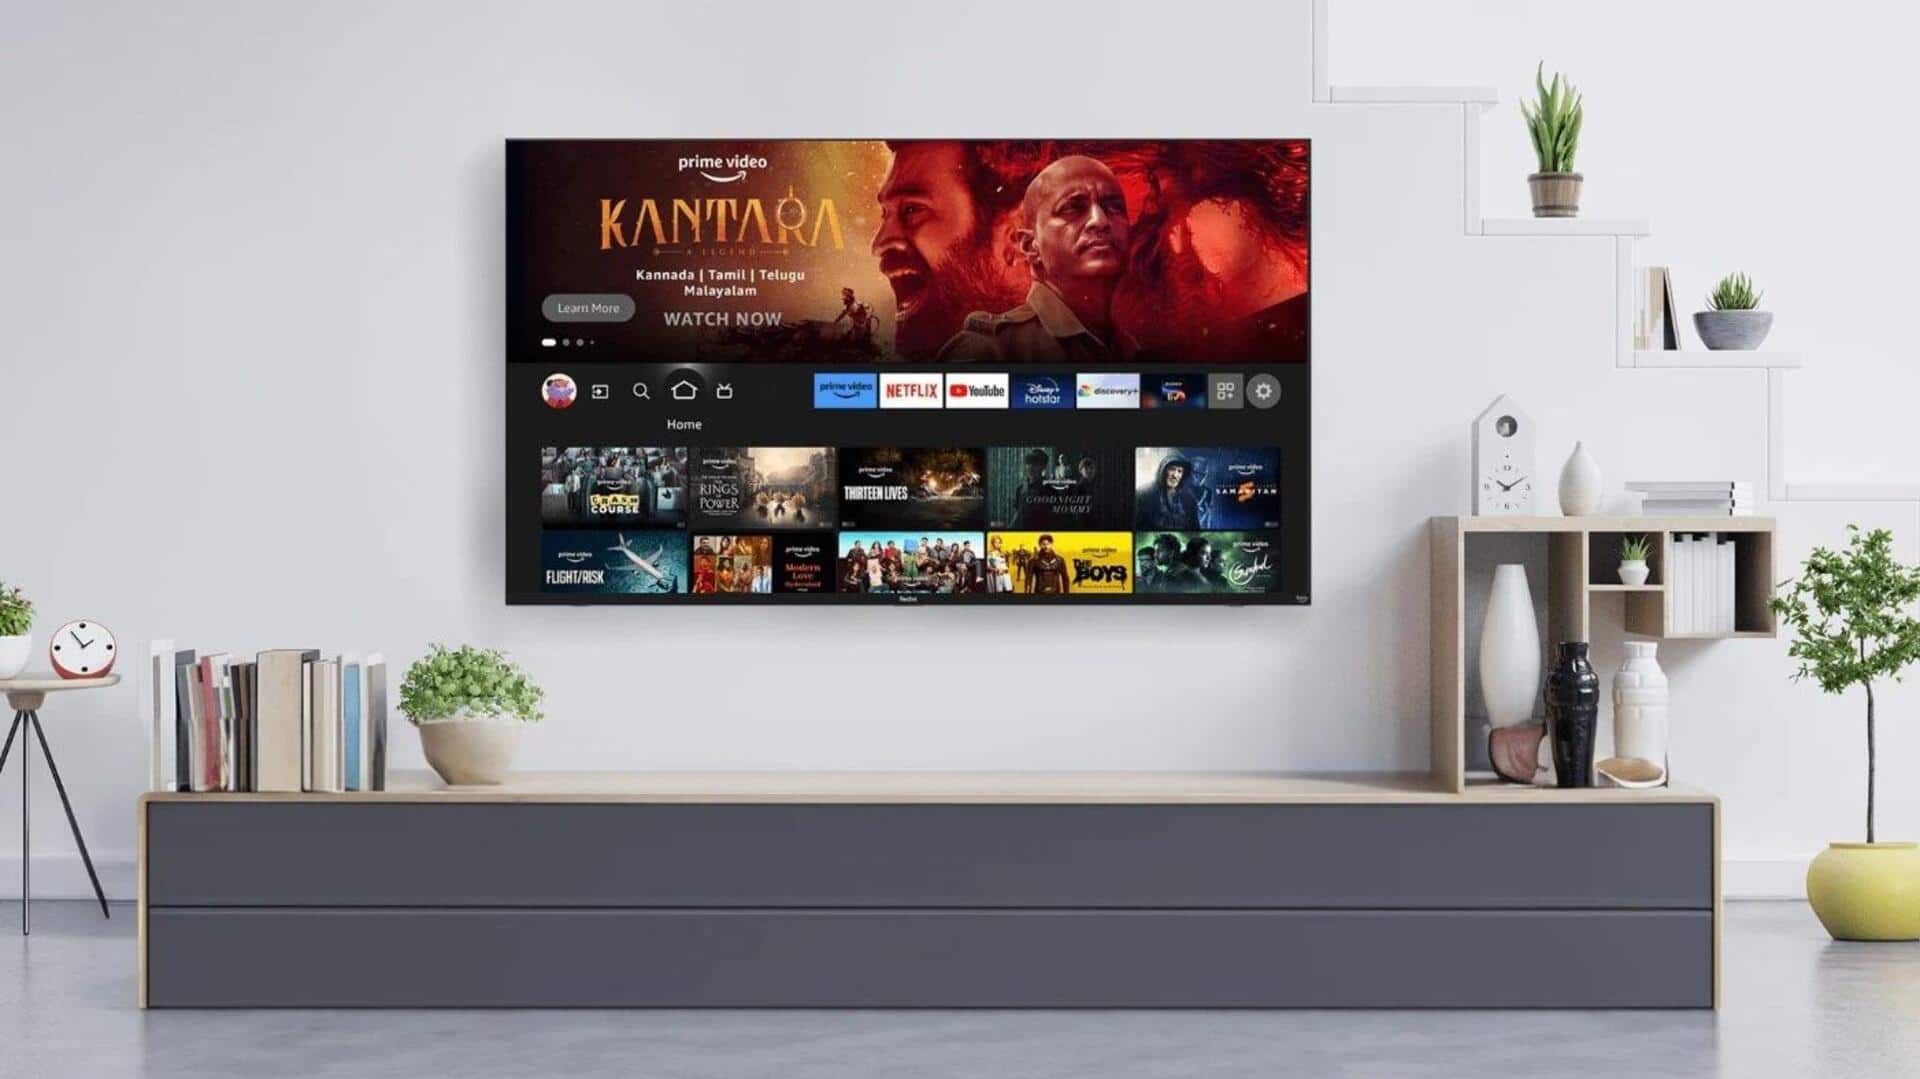 Redmi launches Fire OS-based 4K TV at Rs. 25,000